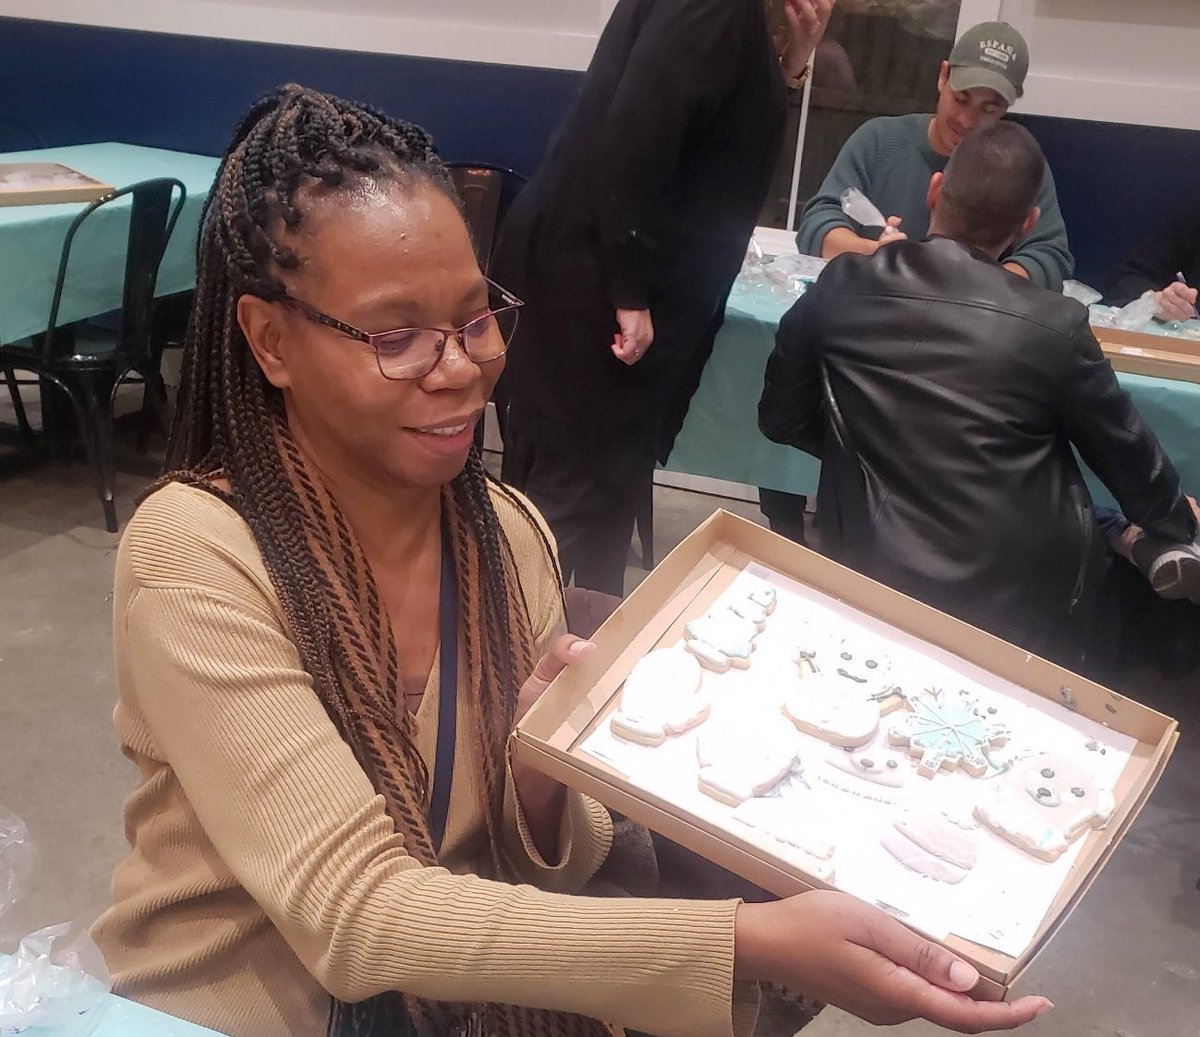 How sweet it is to be a part of our team! The ESL Chili Avenue Office flexed their creative muscles and participated in a cookie decorating class together. Interested in starting a career as unique as you? Learn more: esl.org/careers?utm_ca… #ESLCareersROC #ROC #CreditUnion